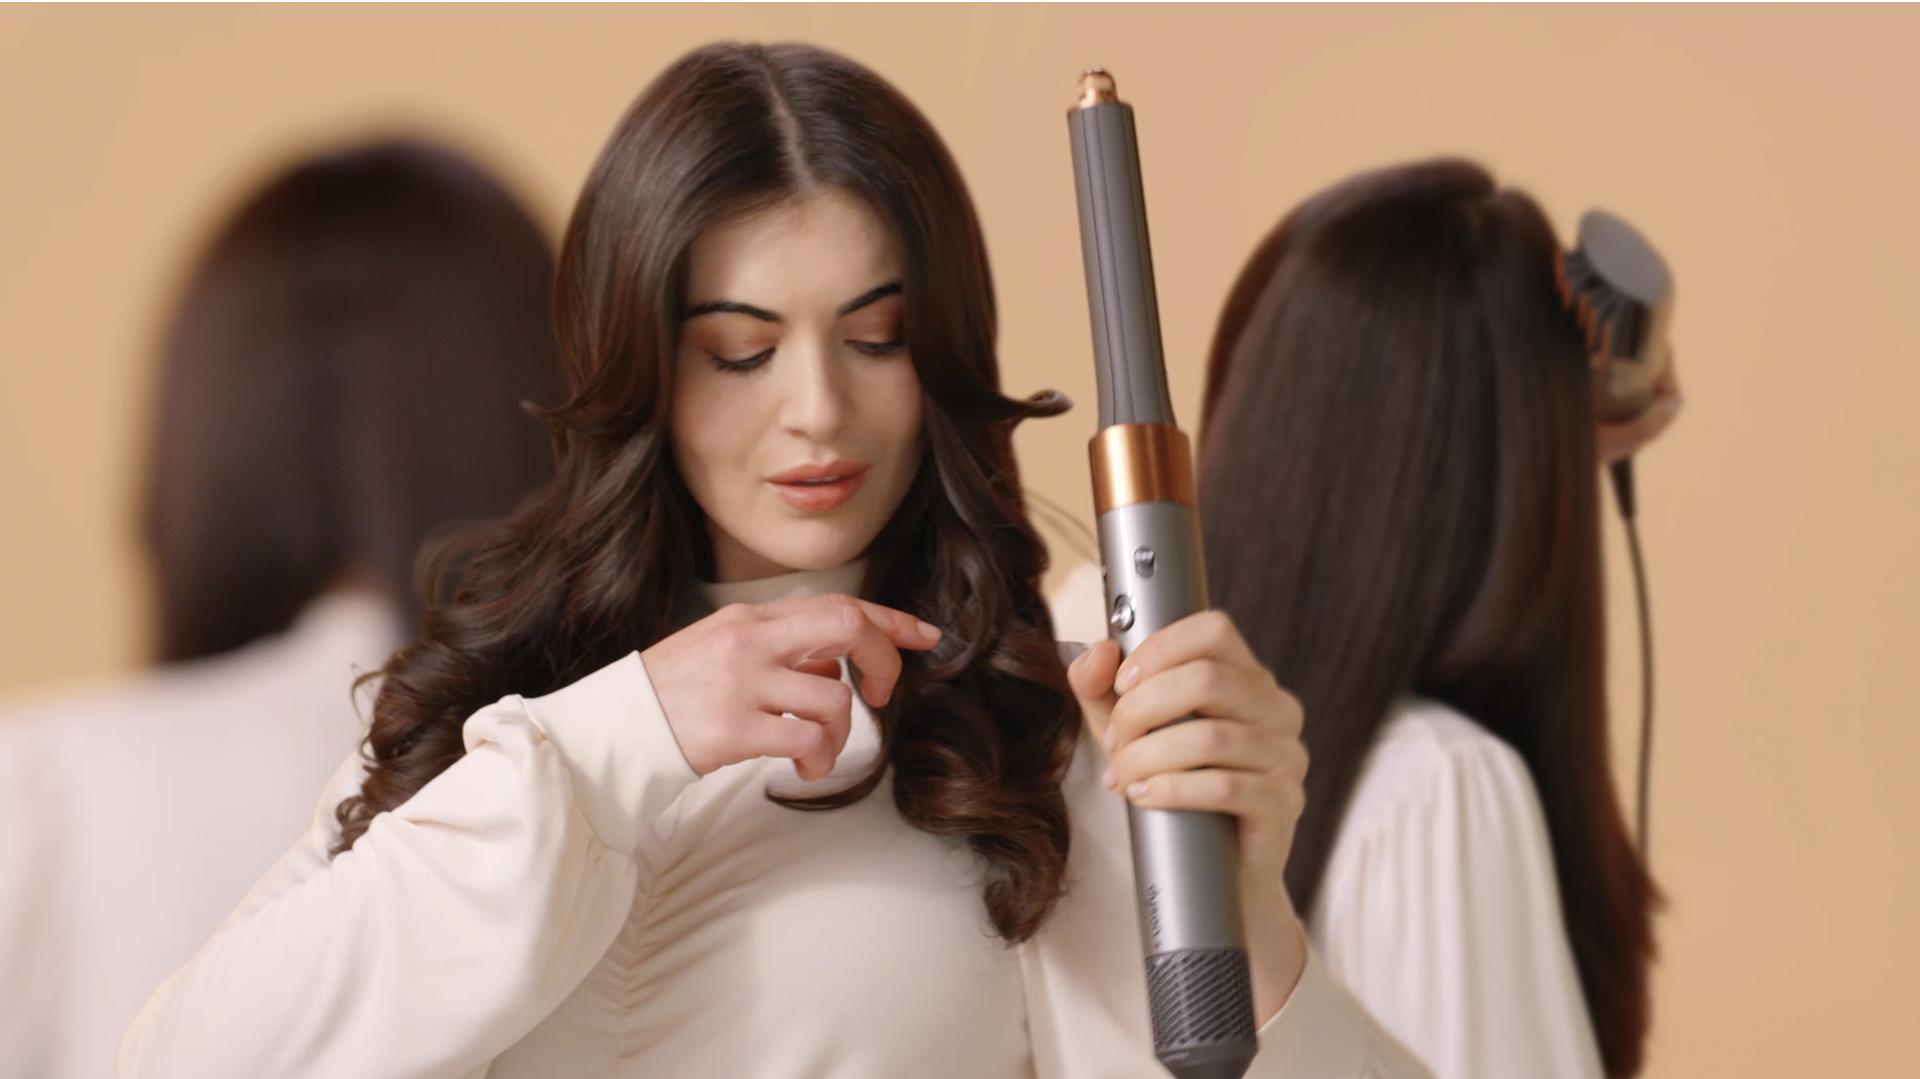 Complete overview of Dyson hair care products